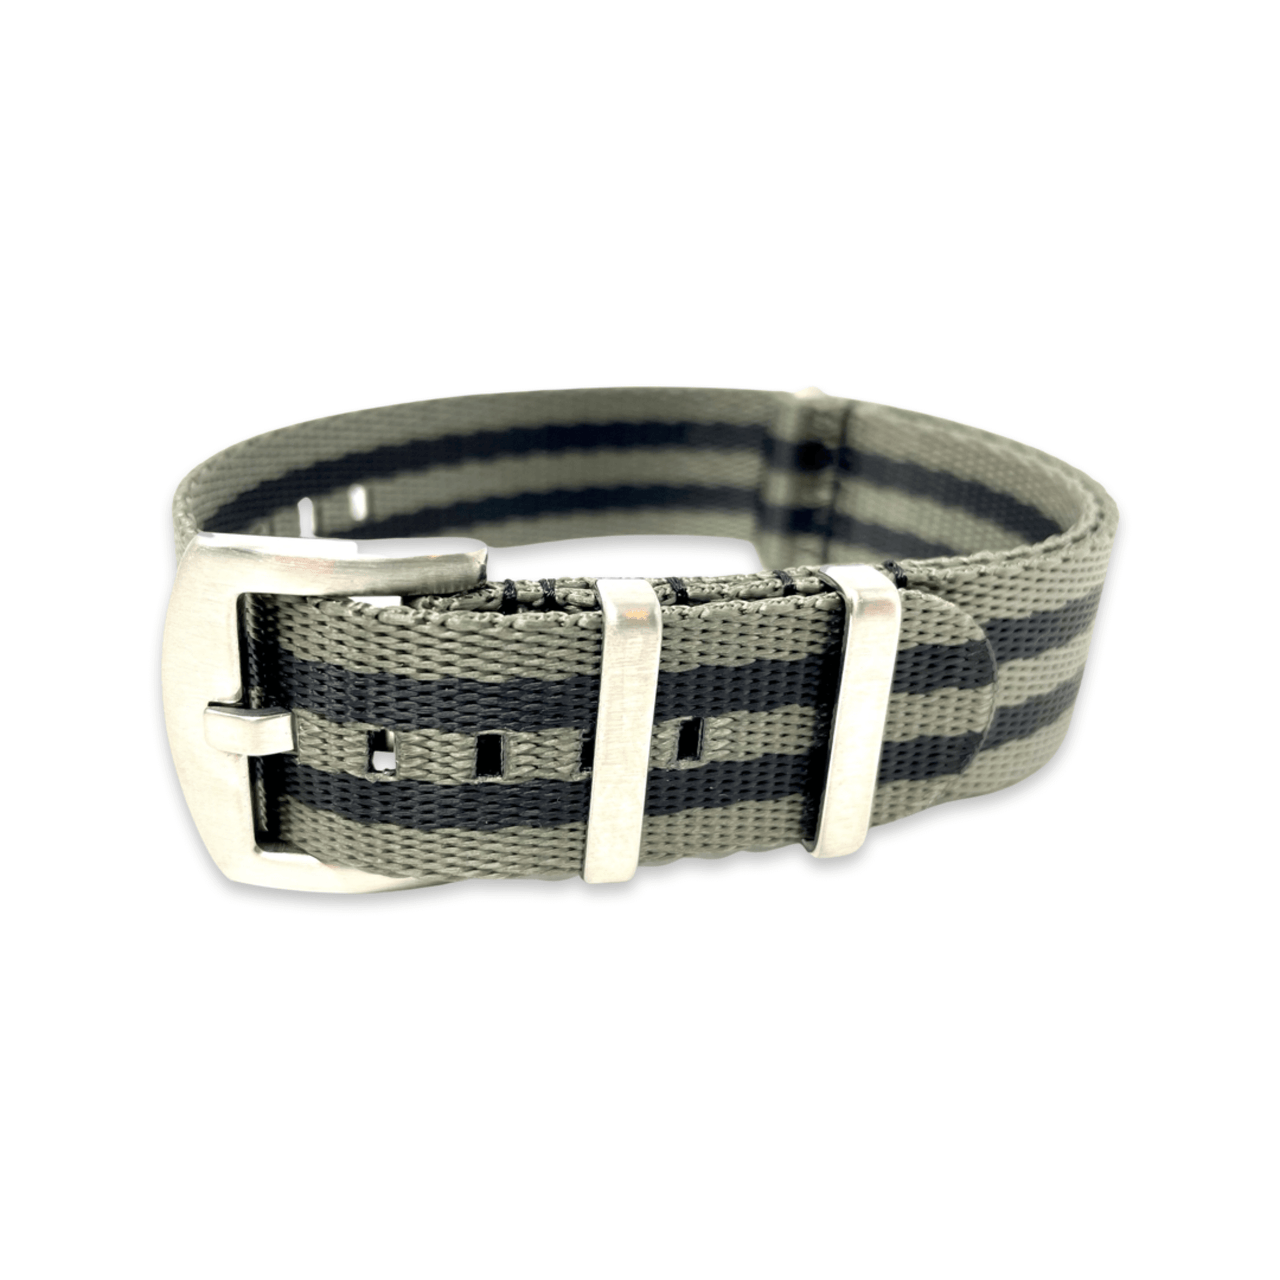 Premium Thick Woven Military Style Watch Strap - Grey and Black Stripes